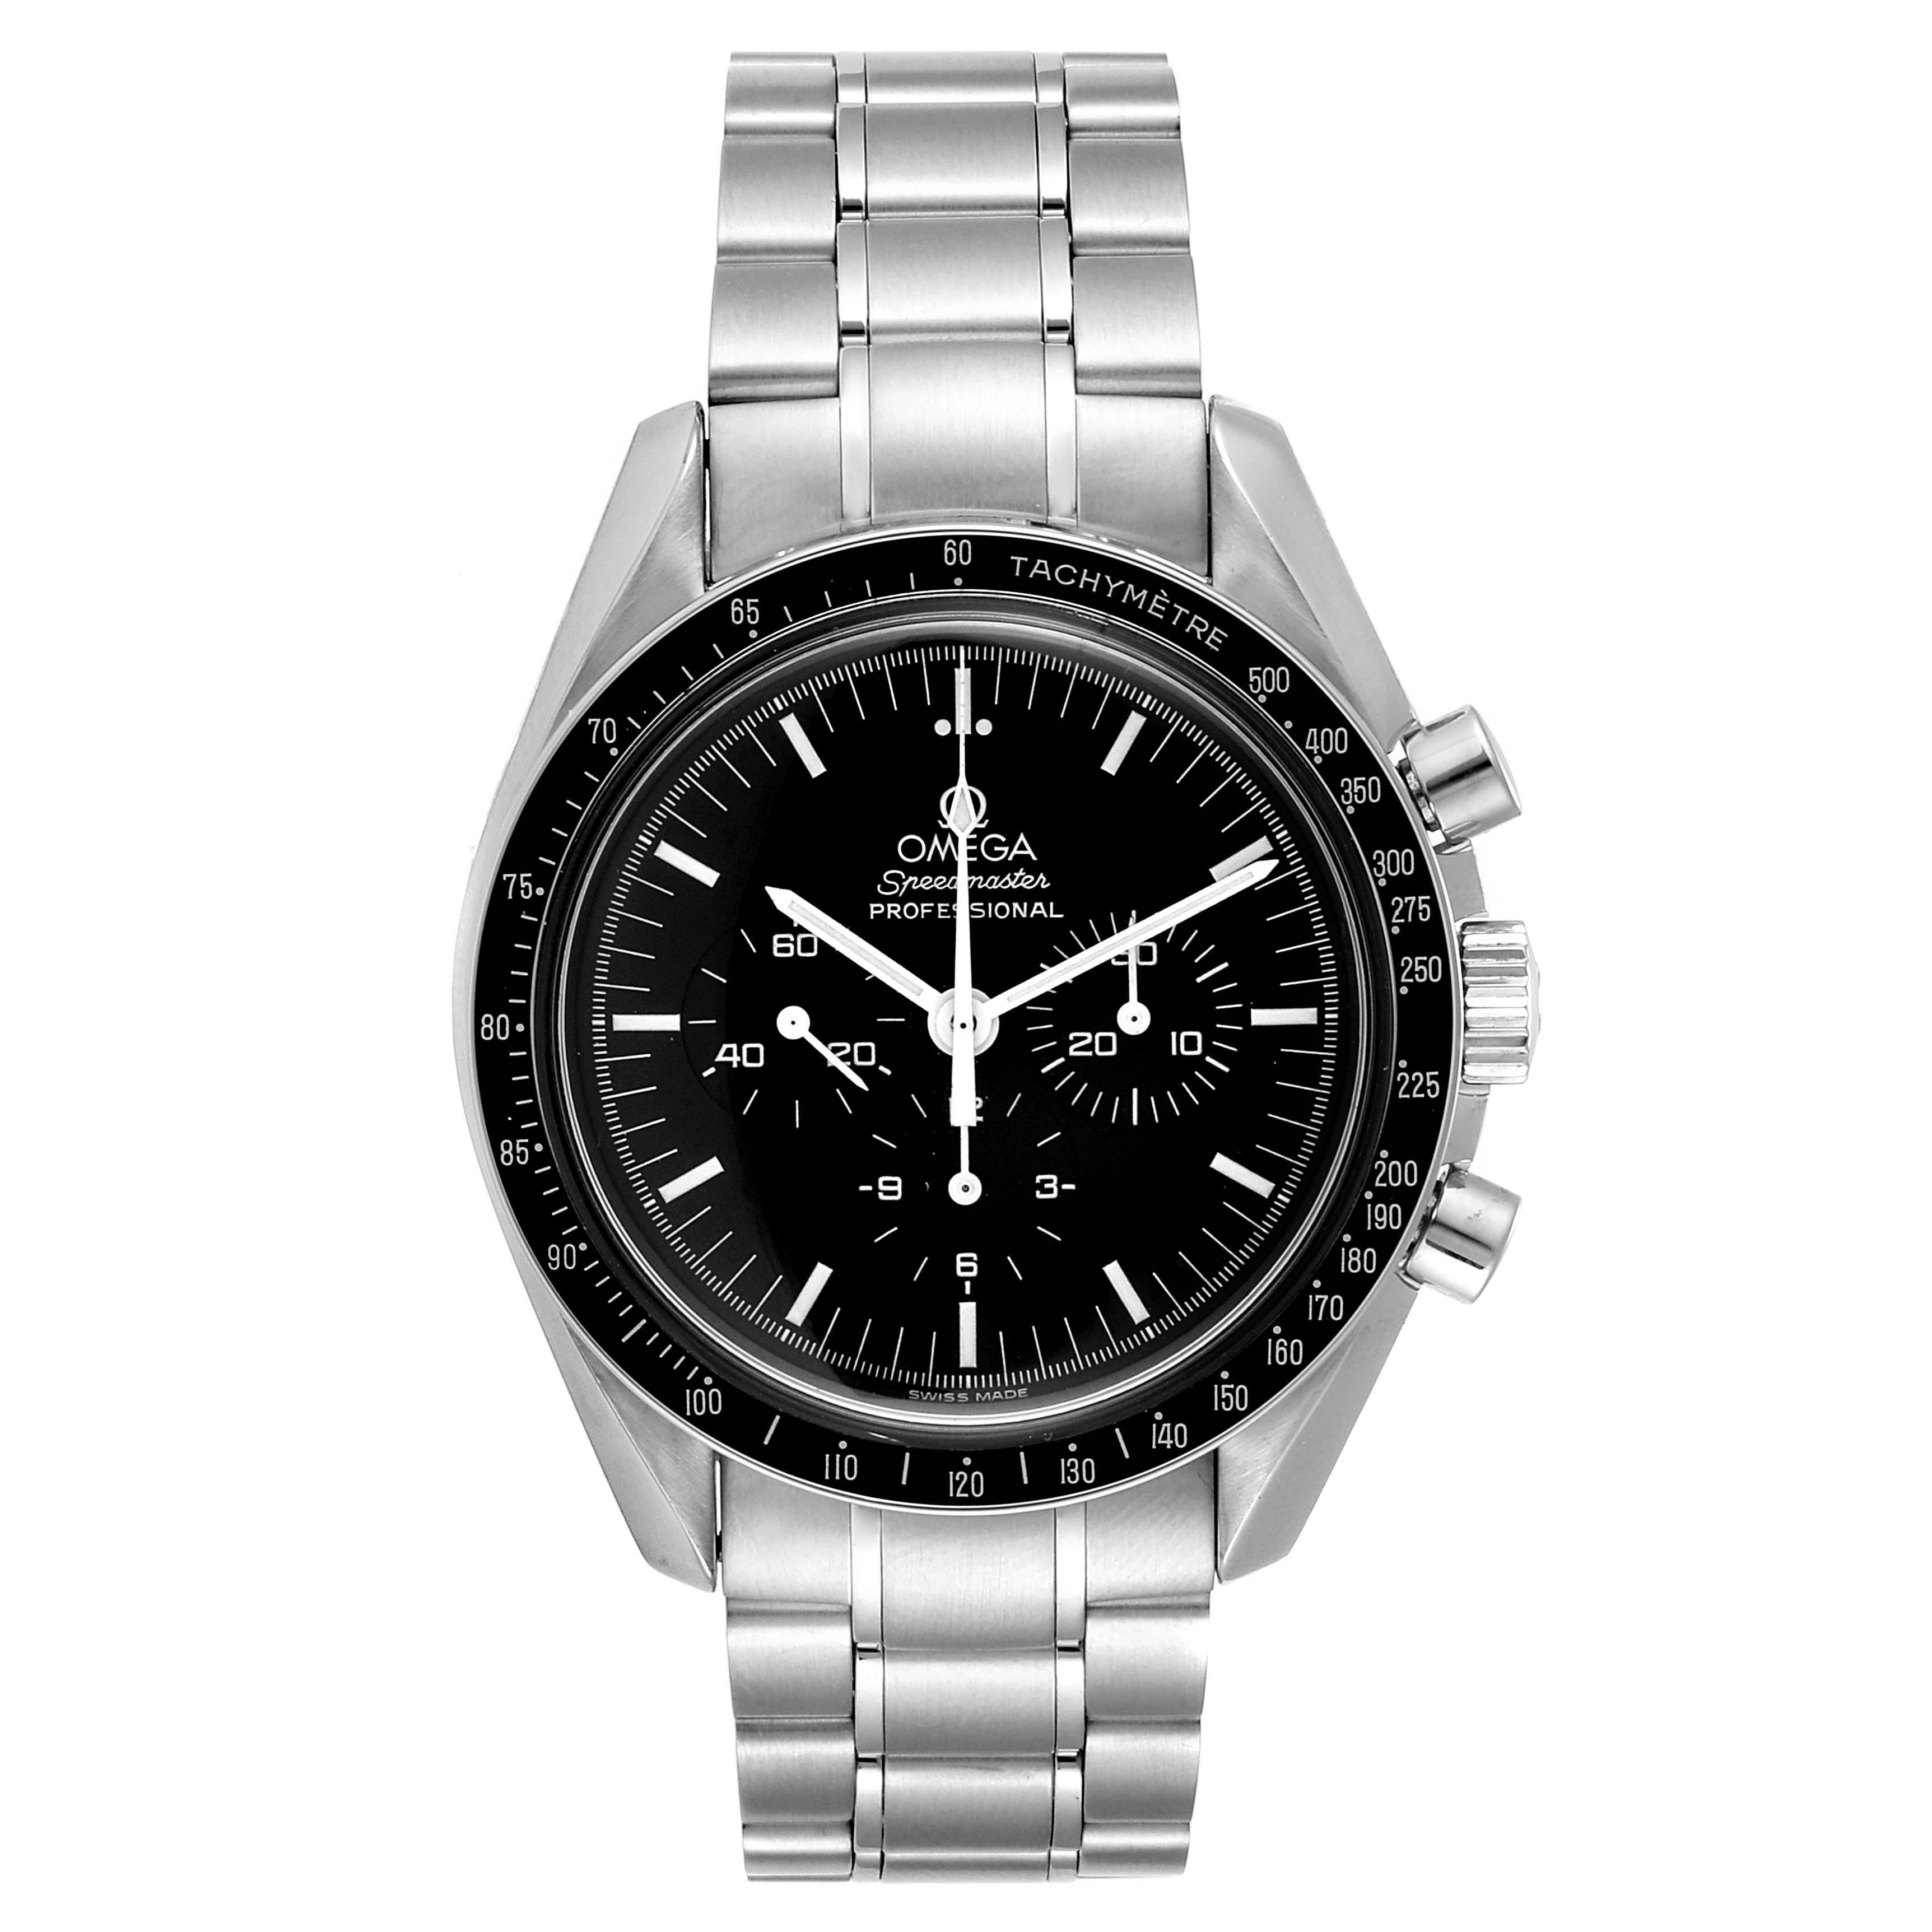 Omega Speedmaster Chronograph Steel Mens Moon Watch 3570.50.00 Card. Manual winding chronograph movement. Stainless steel round case 42.0 mm in diameter. Stainless steel bezel with tachymetre function. Hesalite crystal. Black dial with indexes and